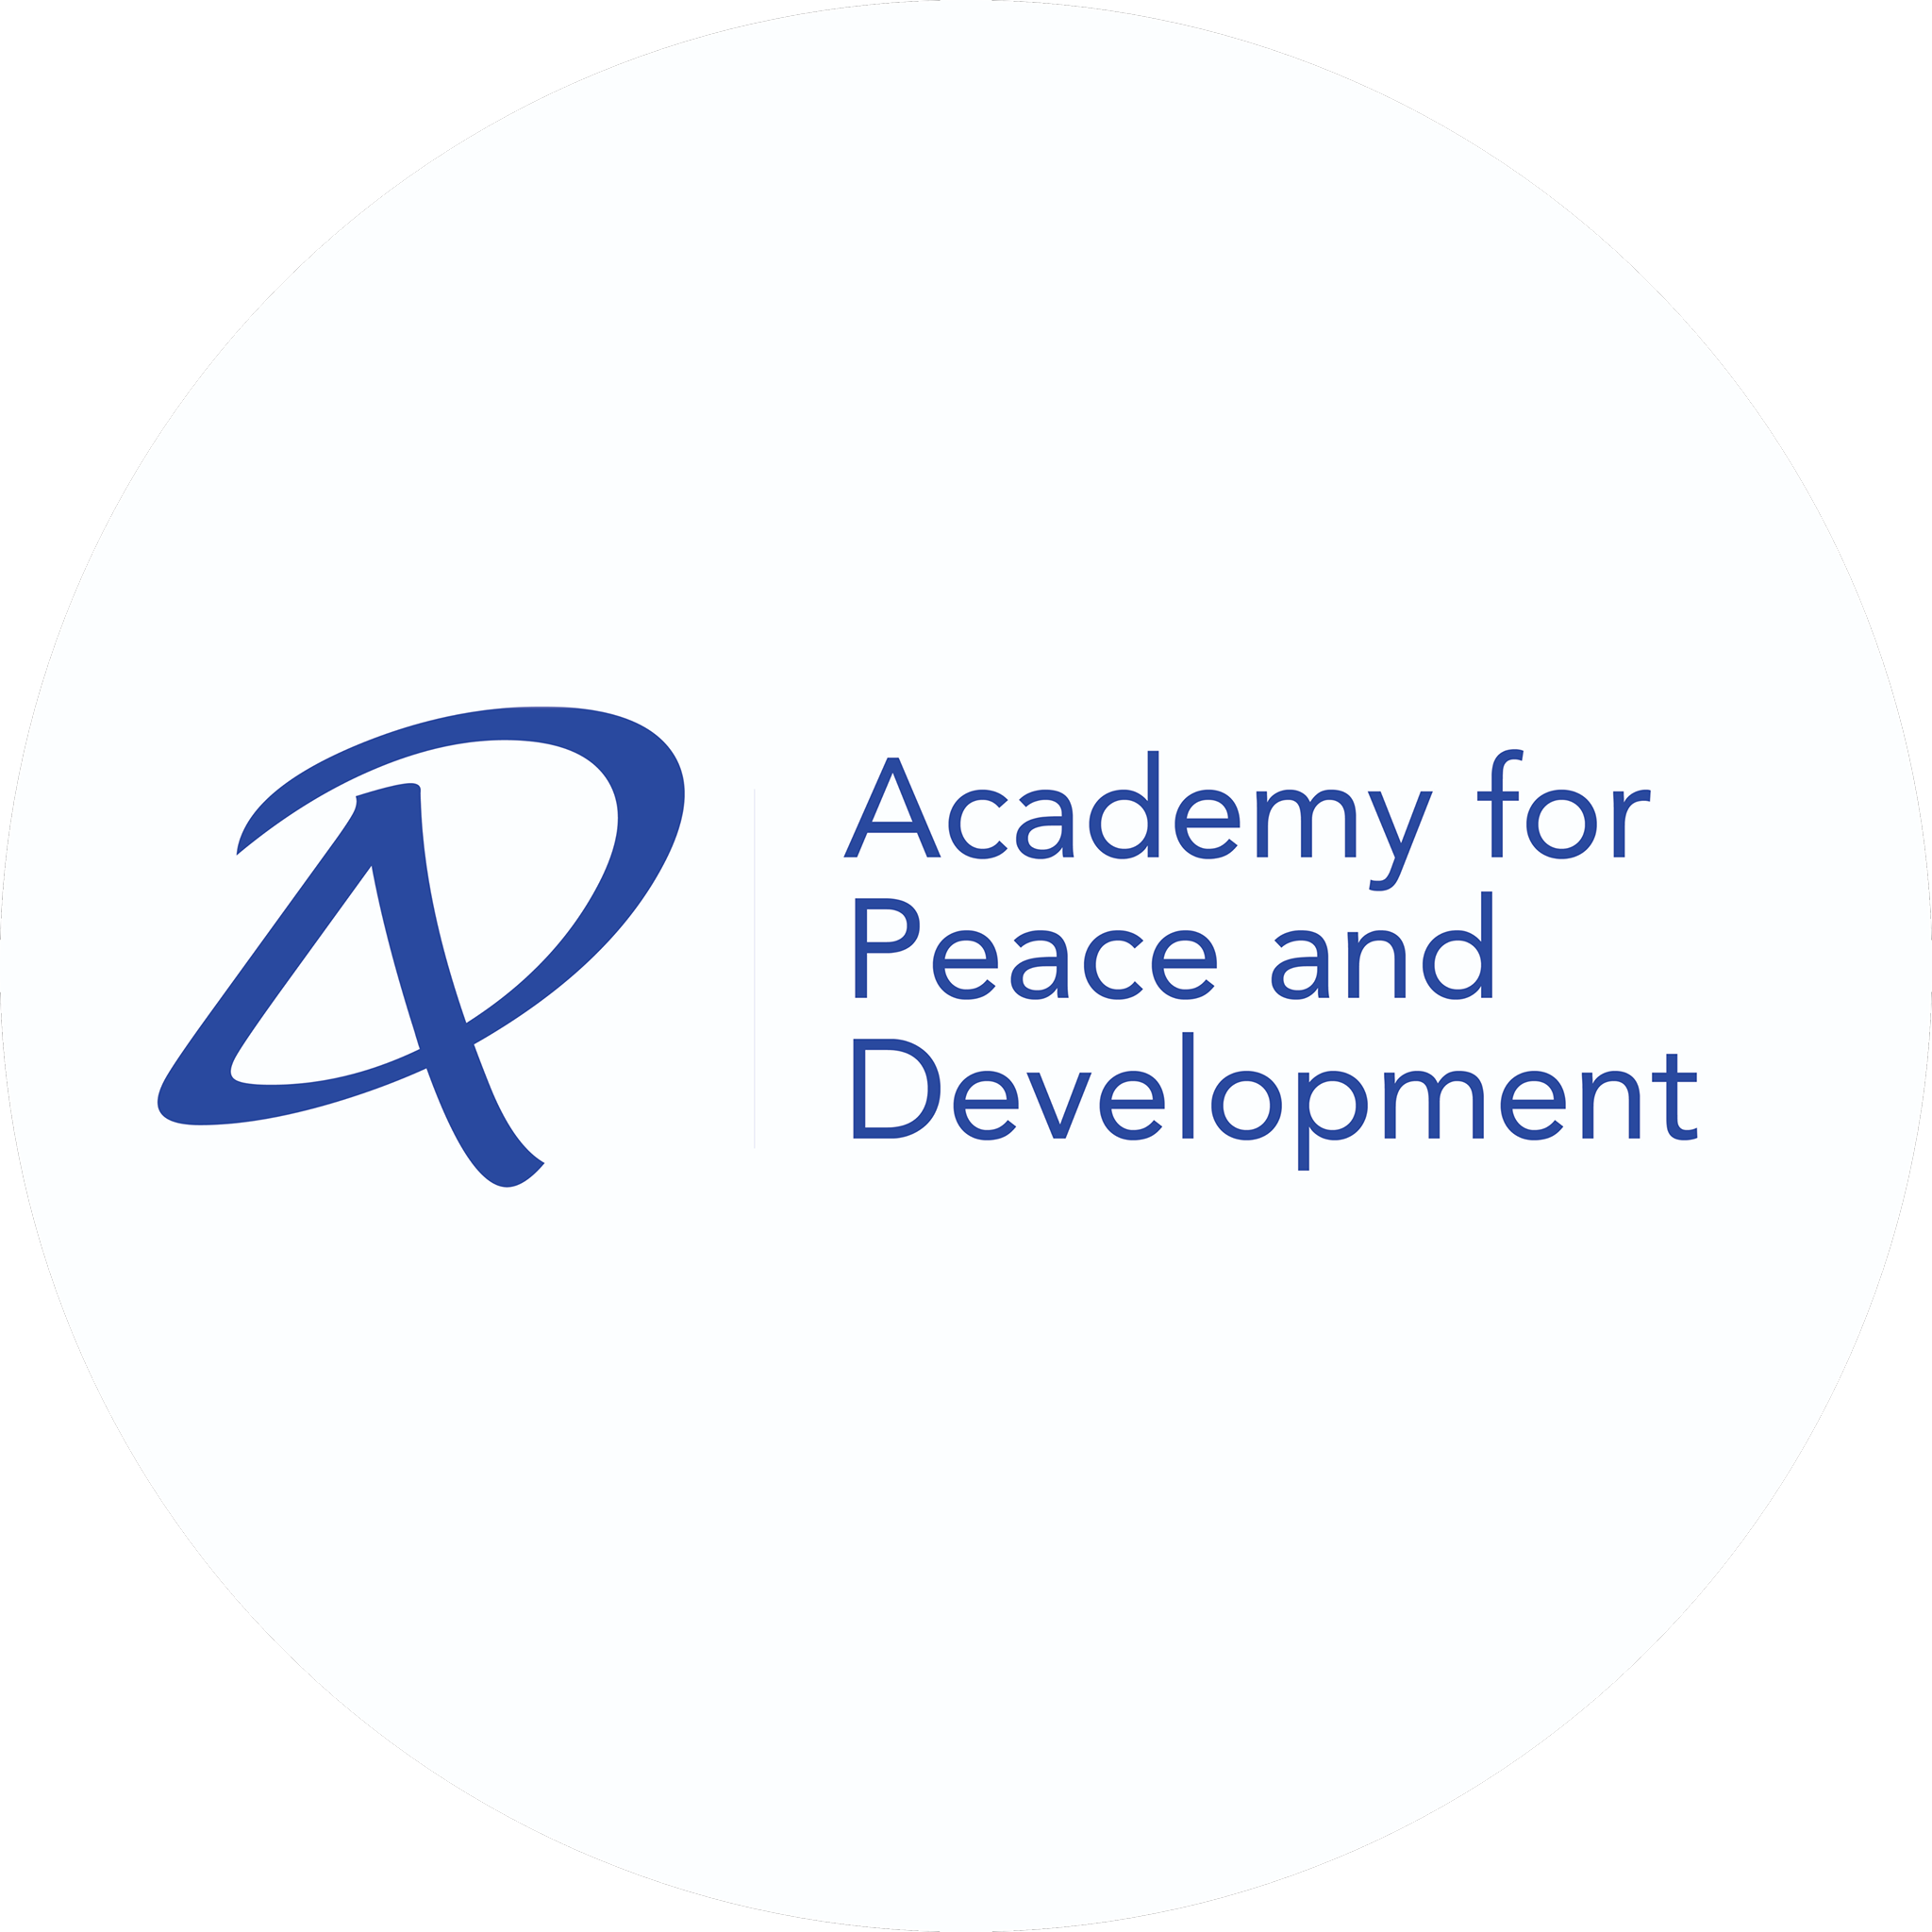 Academy for Peace and Development